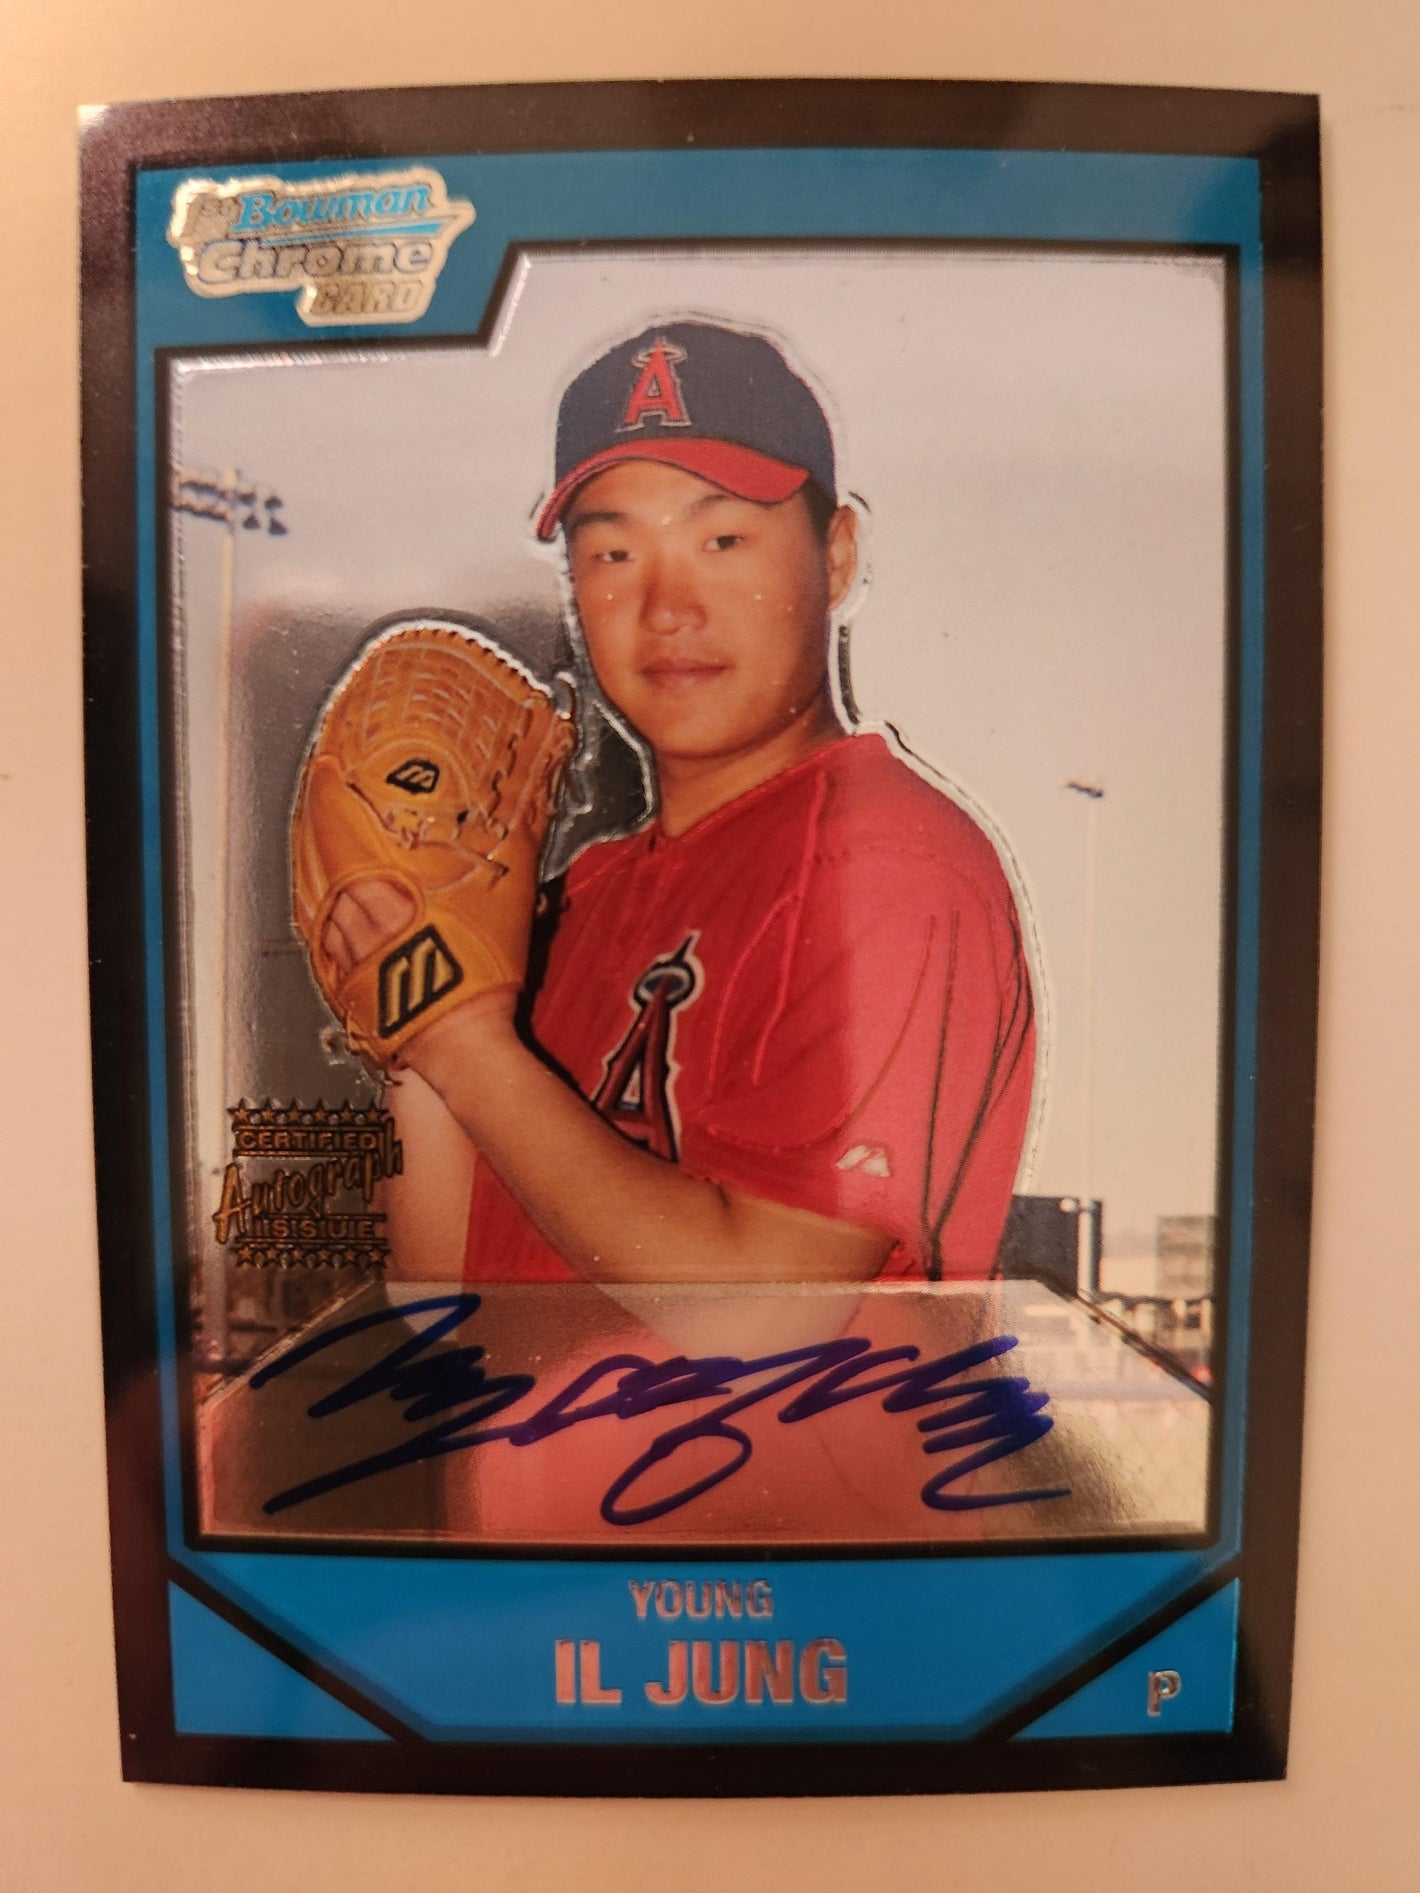 Young Il Jung Signed 2007 Bowman Chrome Prospects Baseball Card - Los Angeles Angels #BC246 AU - PastPros